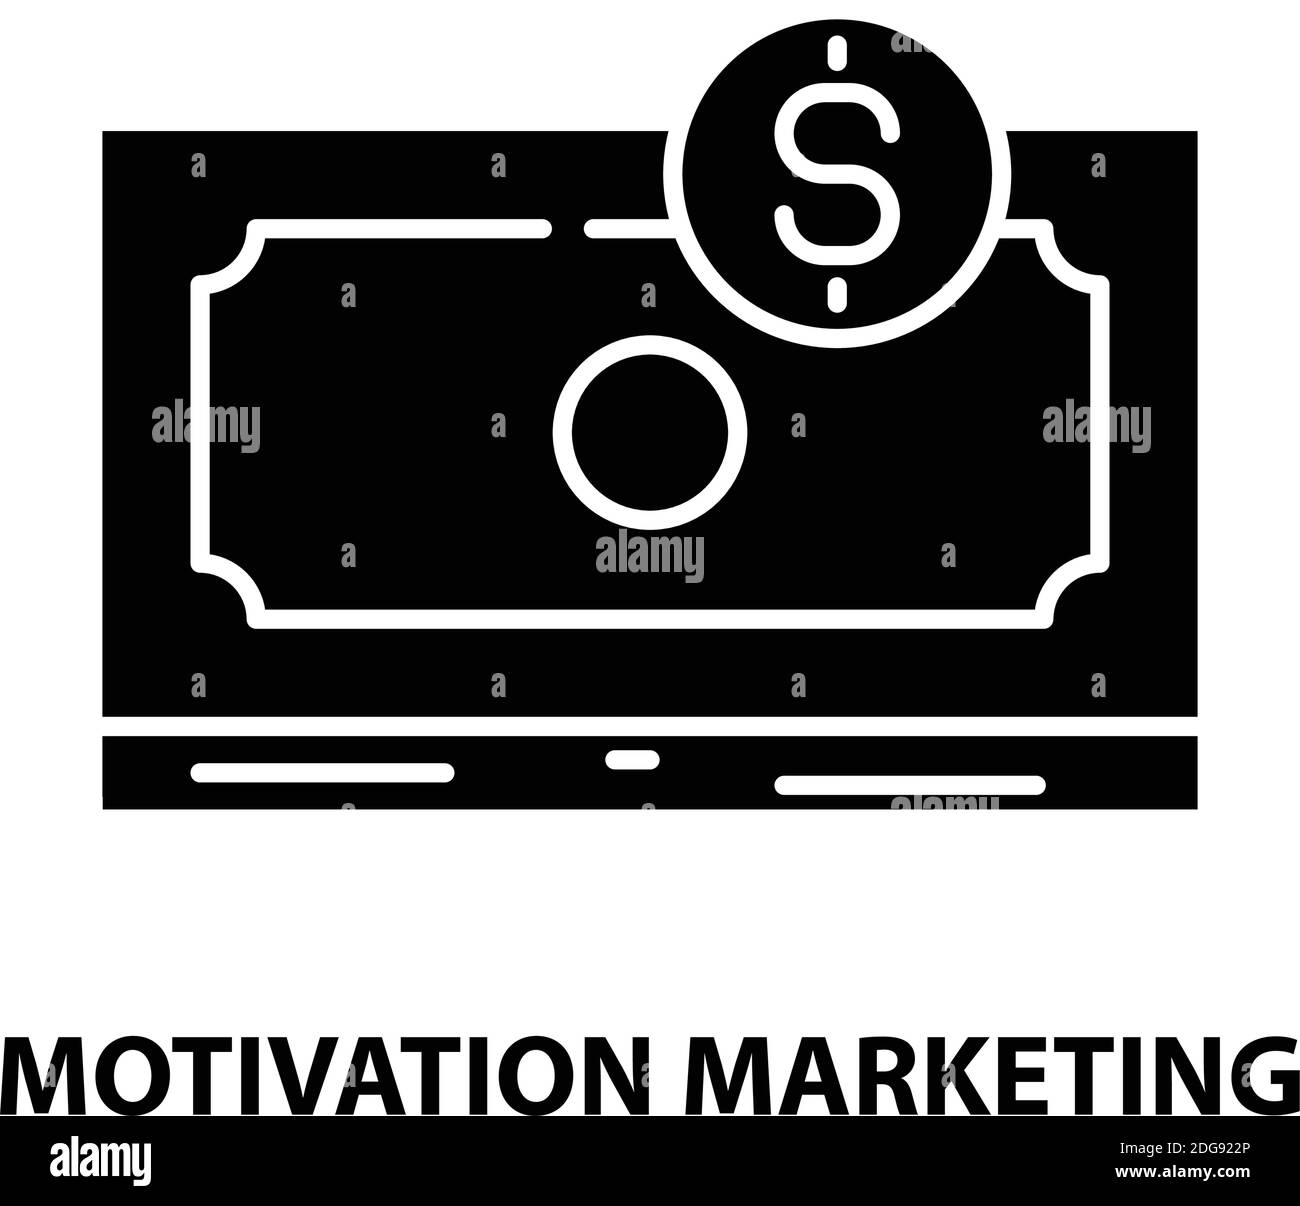 motivation marketing icon, black vector sign with editable strokes, concept illustration Stock Vector